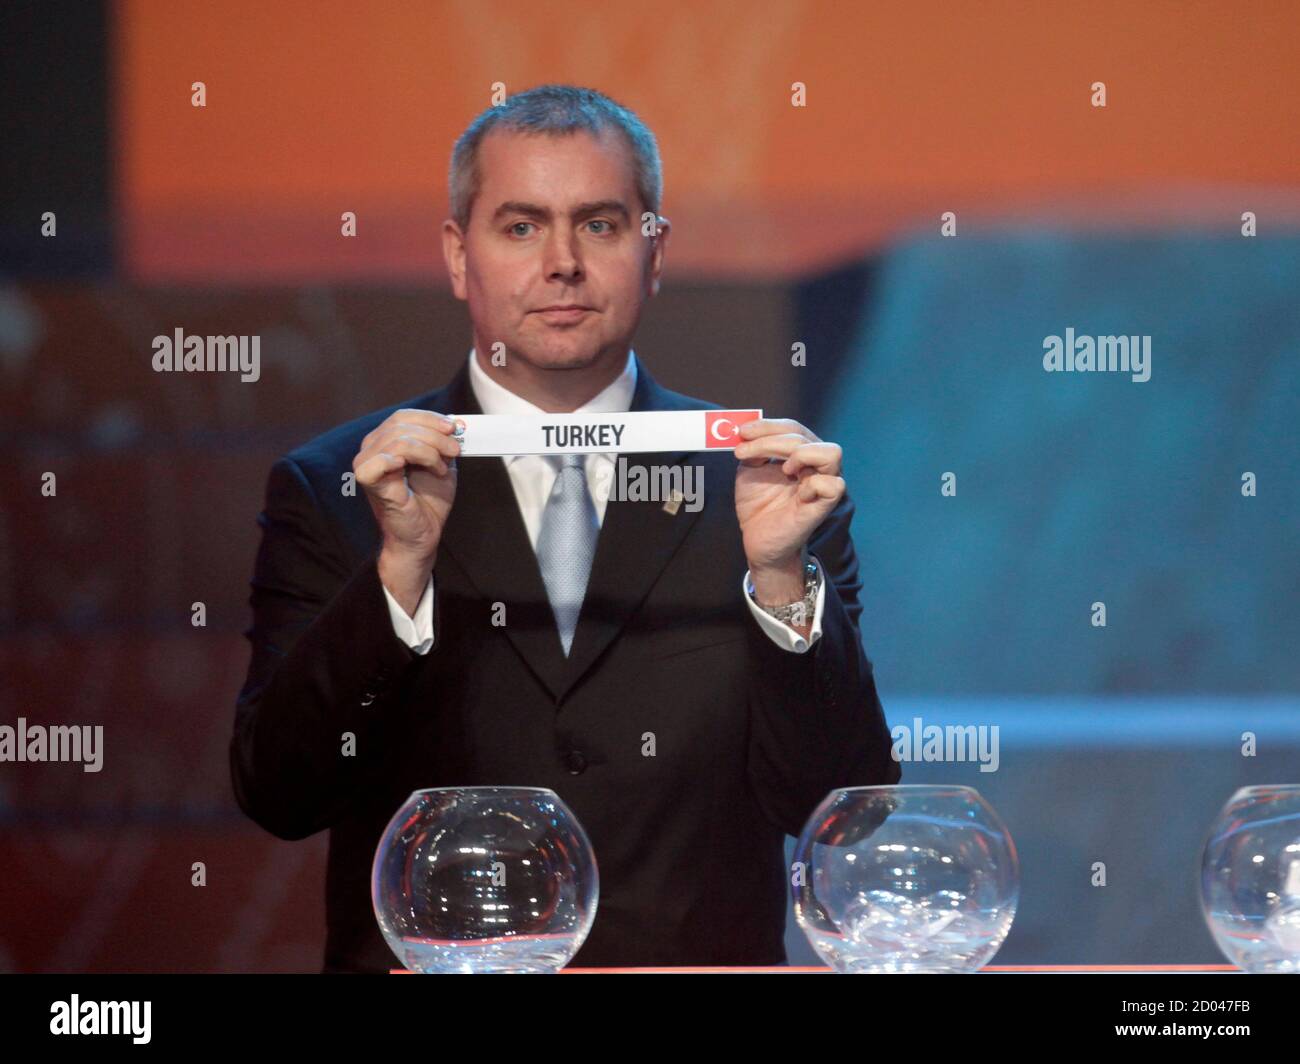 FIBA Europe competition coordinator Richard Stokes holds up a slip of paper  with the name "Turkey" during the 2011 FIBA European Championship draw in  Vilnius January 30, 2011. REUTERS/Ints Kalnins (LITHUANIA -